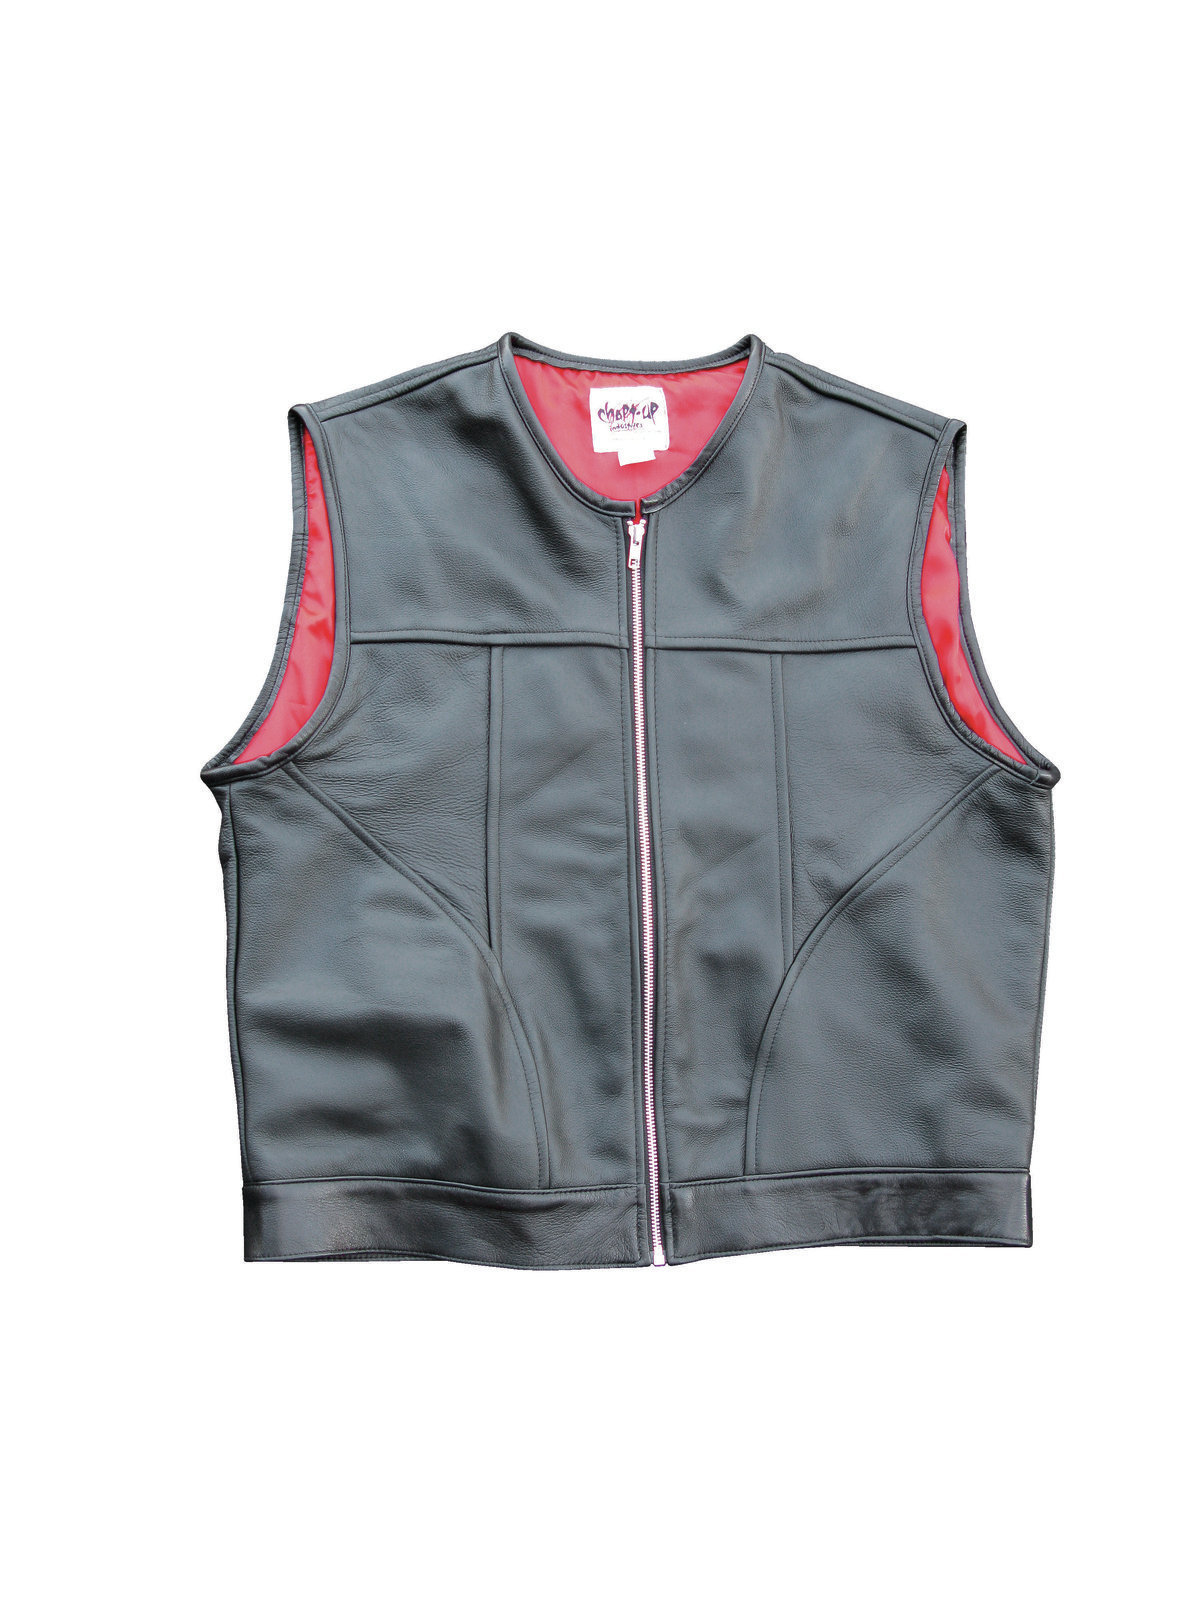 Used And Abused | Chopt-Up Industries Leather Vest | Hot Bike Magazine